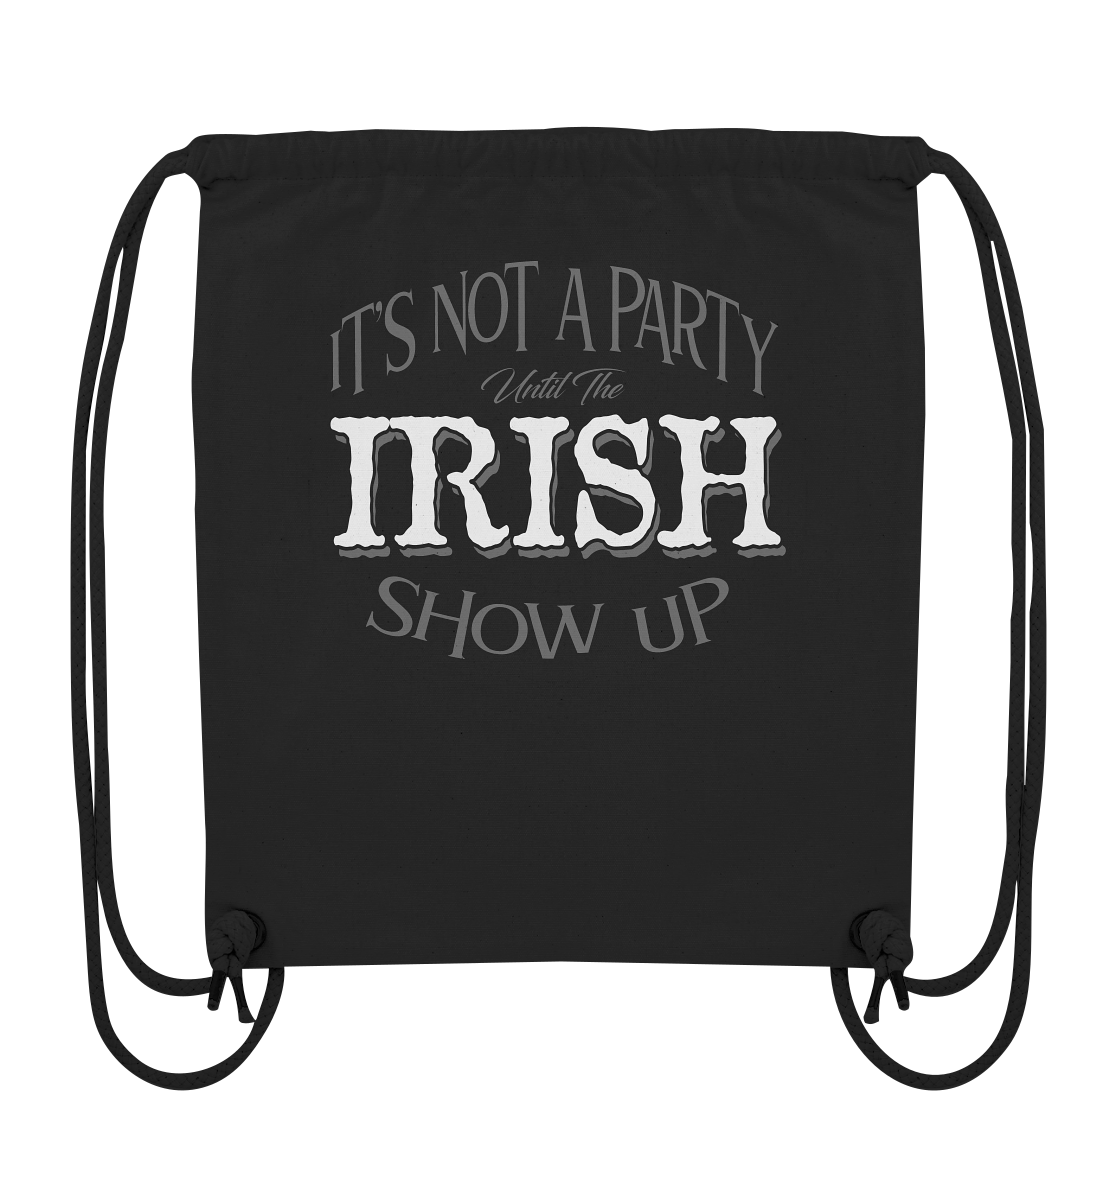 It's Not A Party Until The Irish Show Up - Organic Gym-Bag